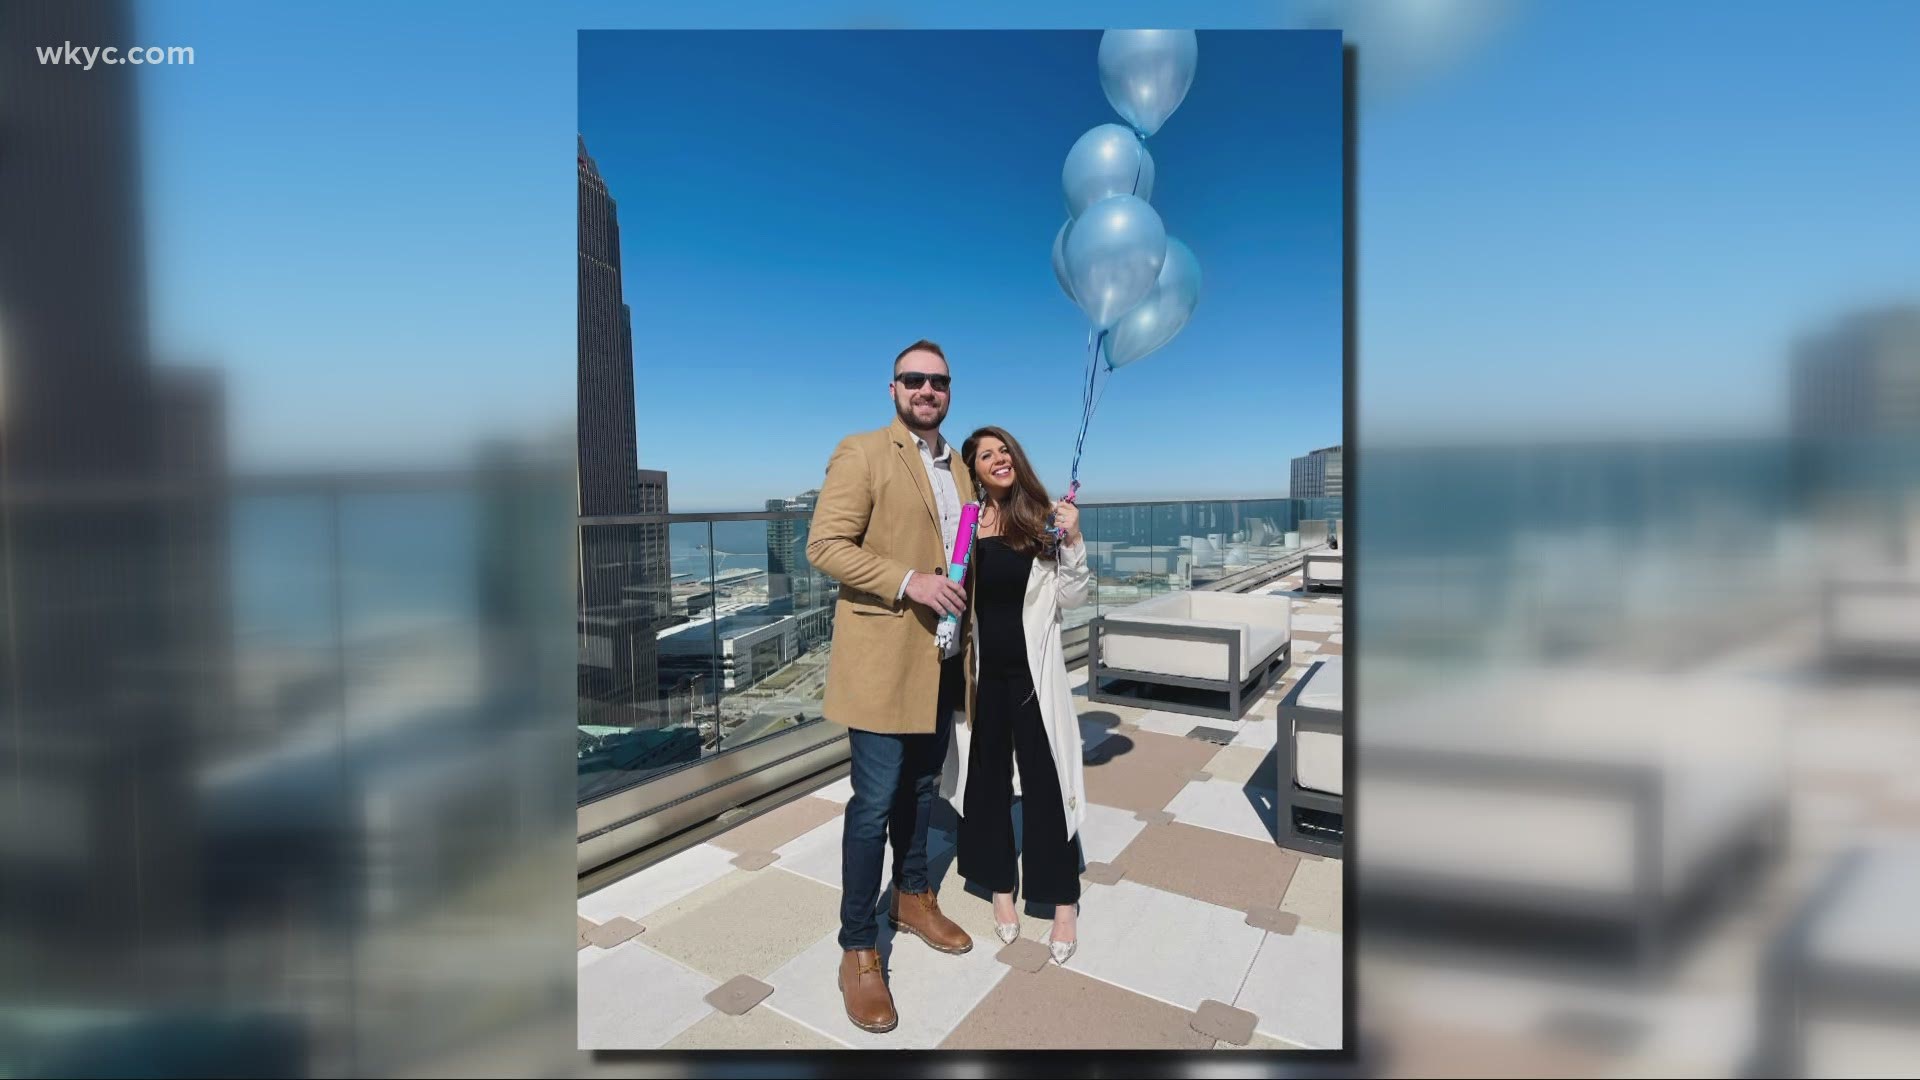 Laura Caso and husband expecting baby boy